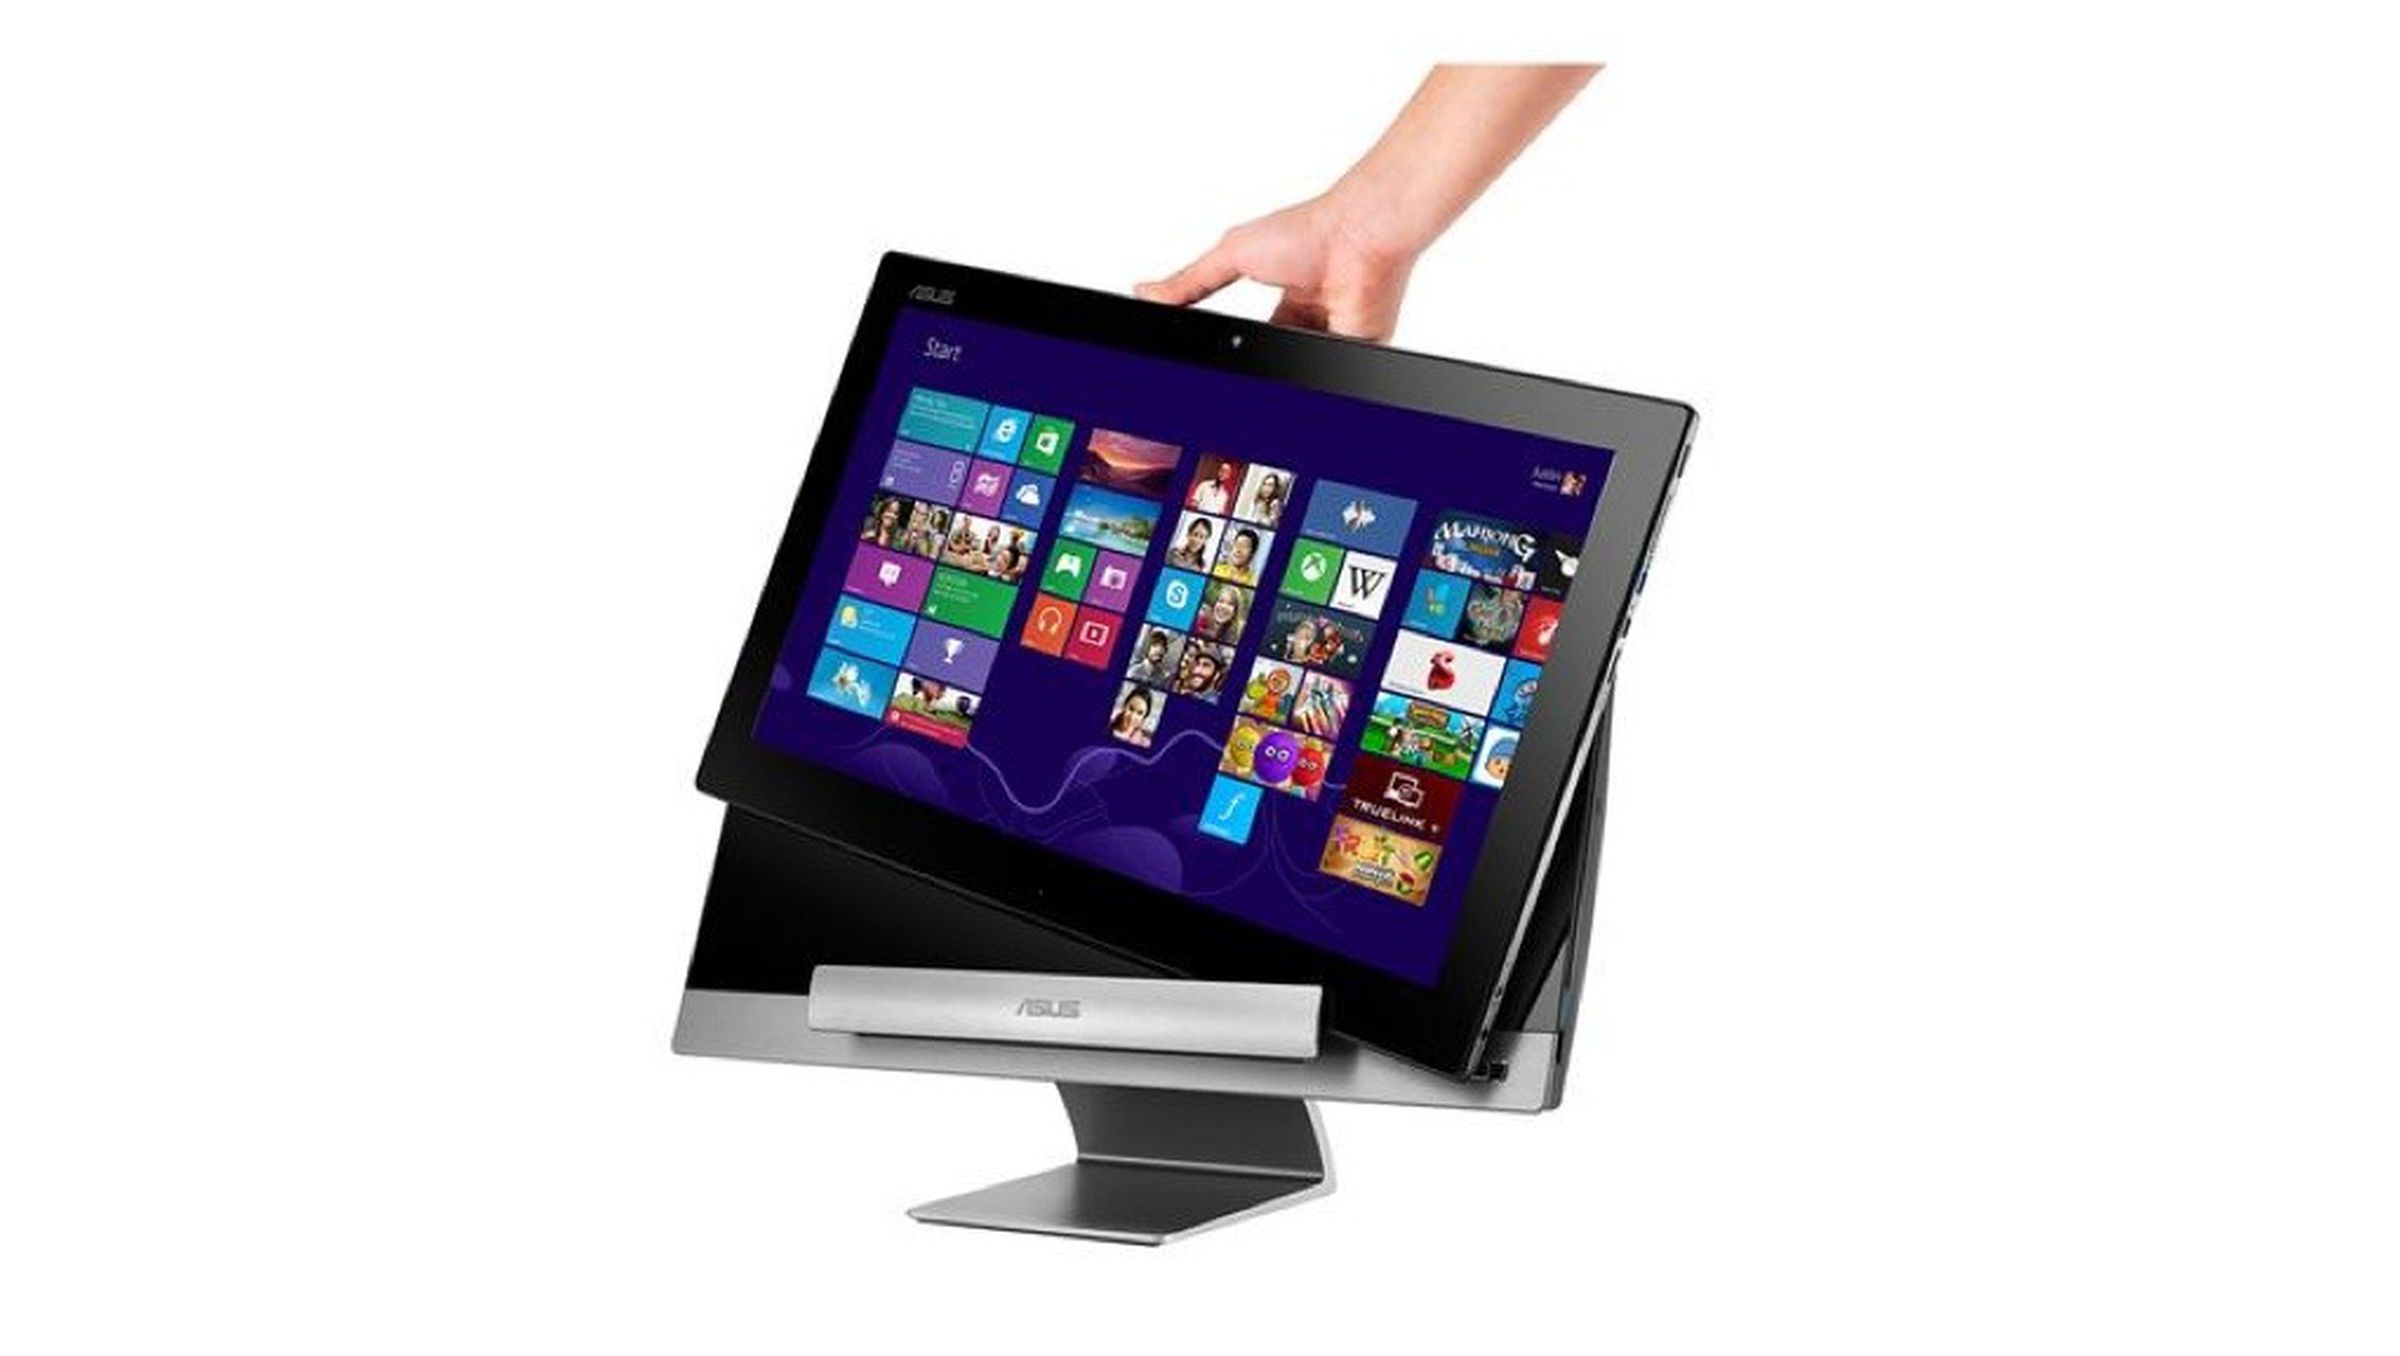 Asus Transformer AiO press pictures